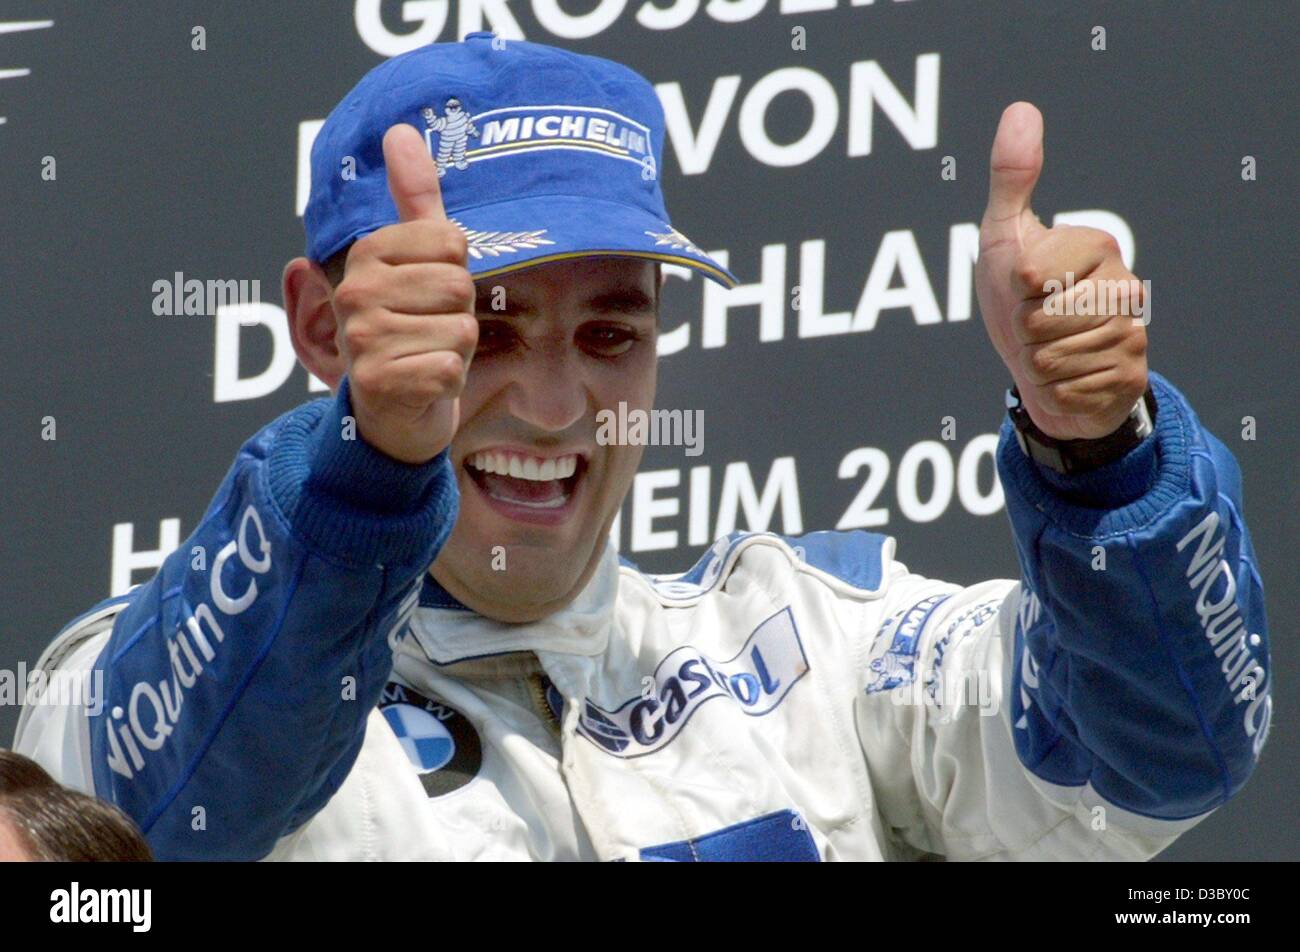 (dpa) - Colombian Juan Pablo Montoya of BMW-Williams celebrates on the podium after winning the Formula One Grand Prix of Germany at the Hockenheim race track in Hockenheim, Germany, 3 August 2003. With 65 points Montoya ranks now on 2nd place in the overall standings. Stock Photo